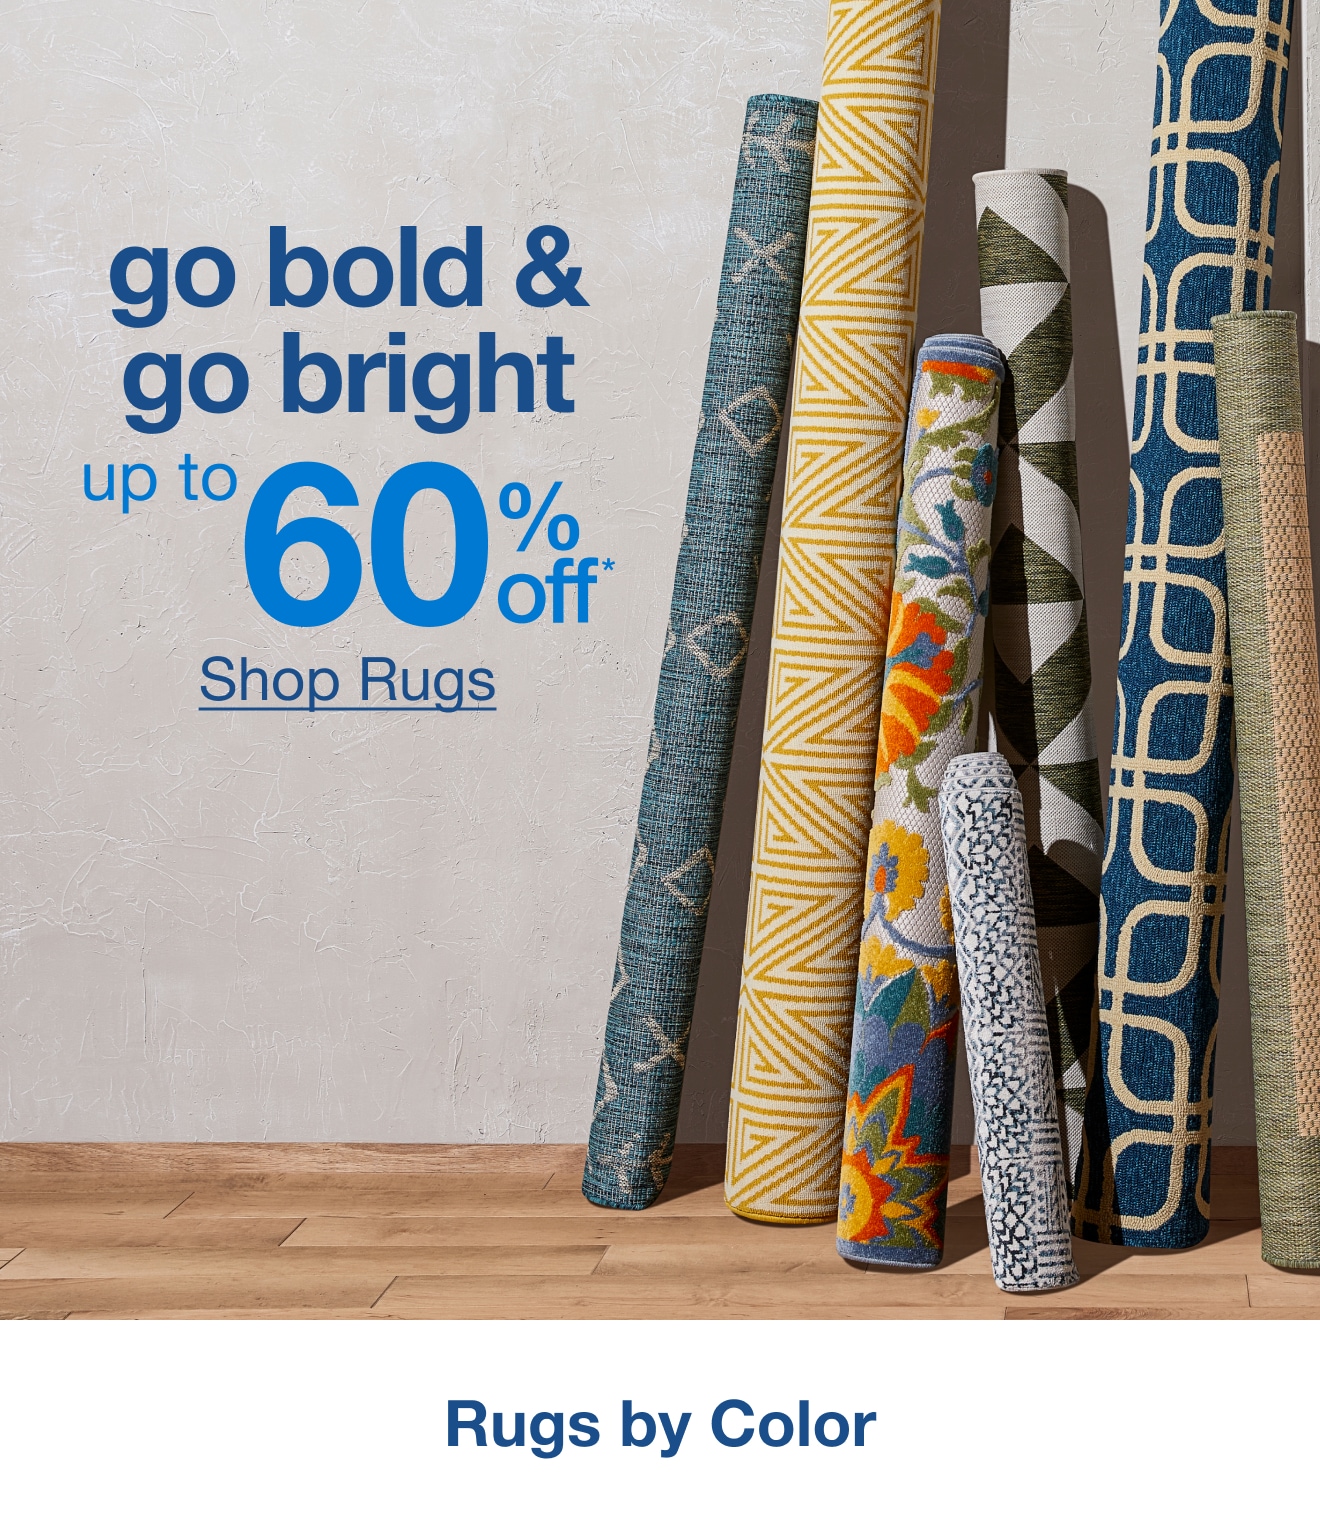 Up to 60% Off Rugs